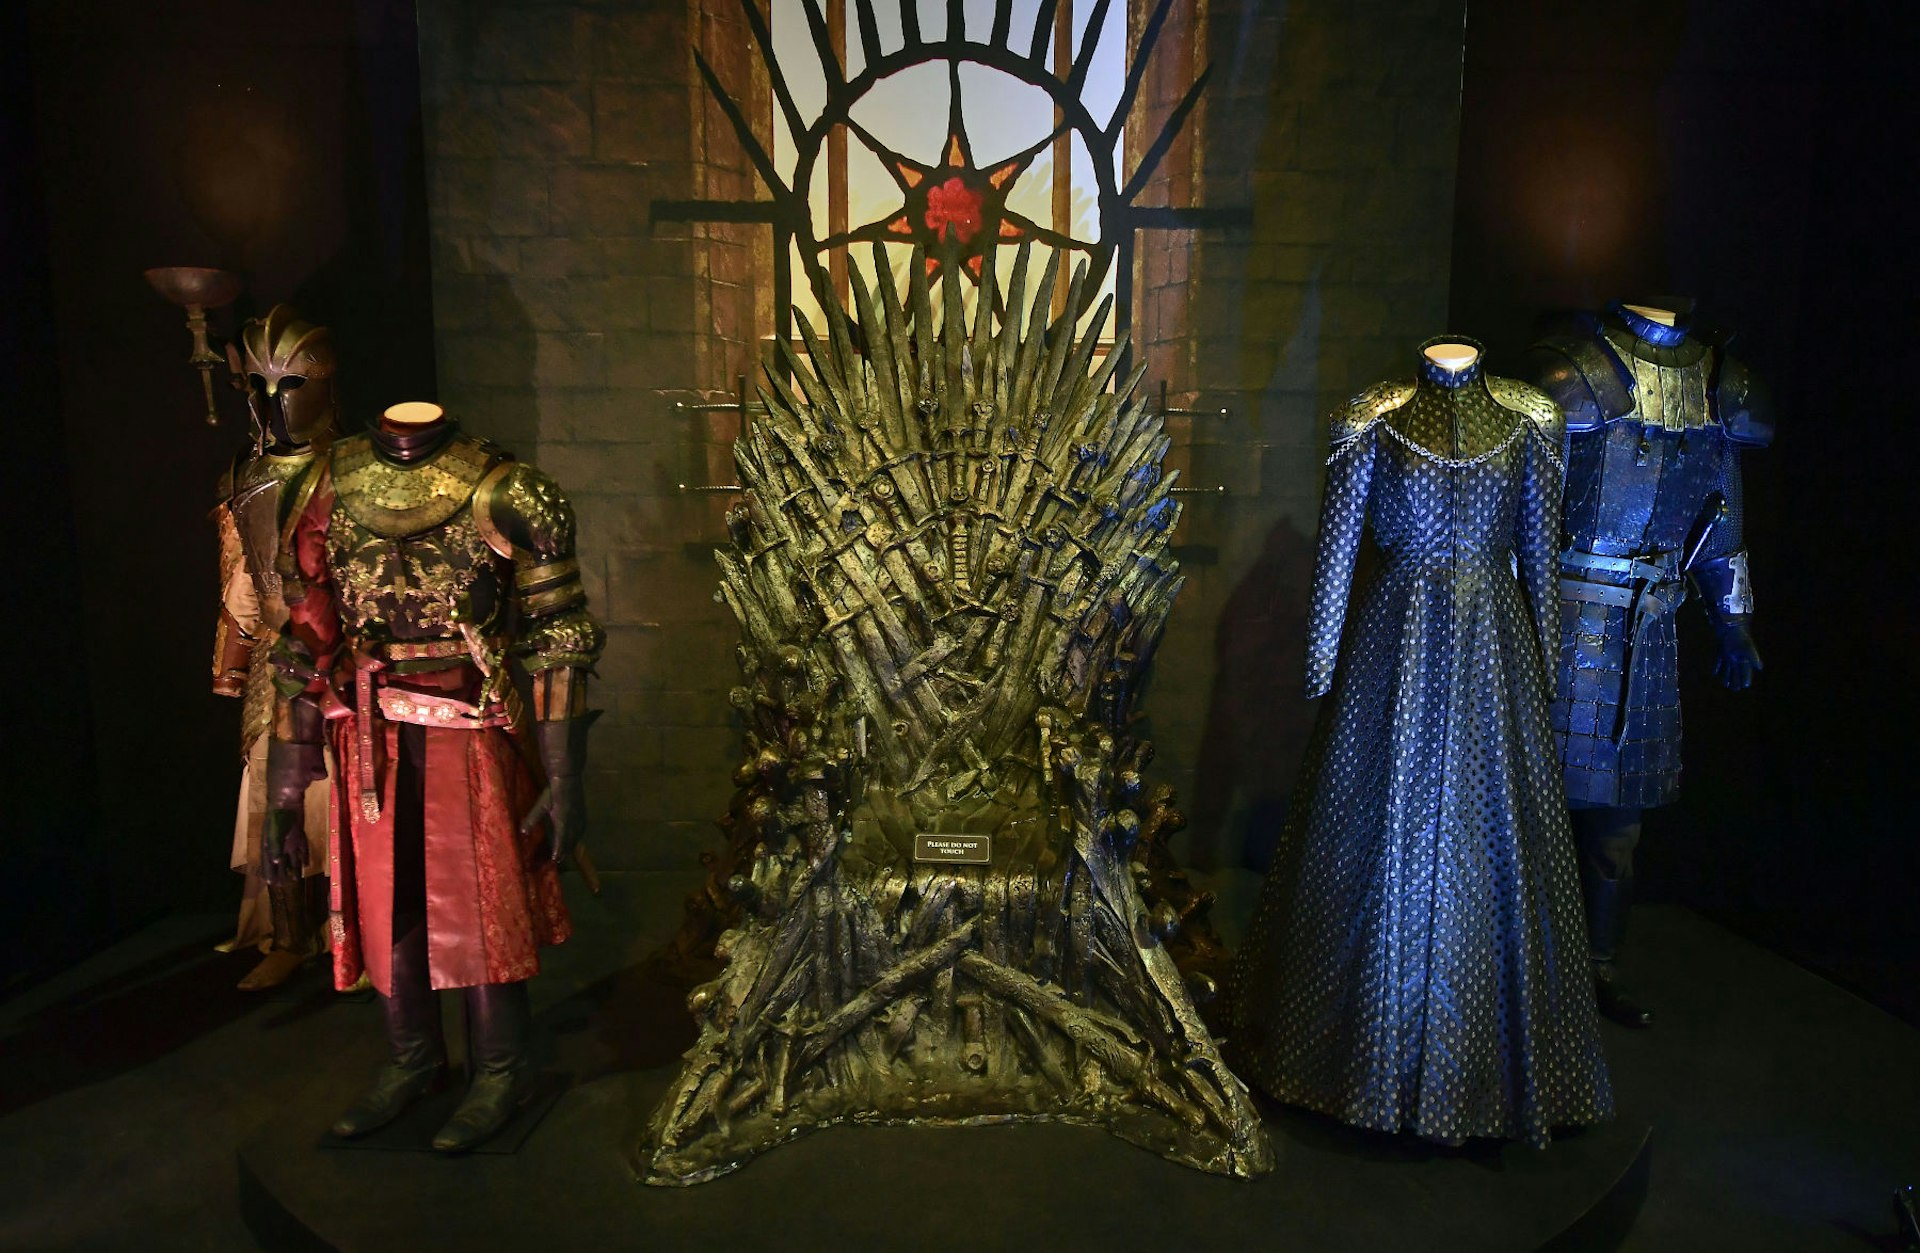 The Iron Throne with costumes from Game of Thrones on display on either side of it